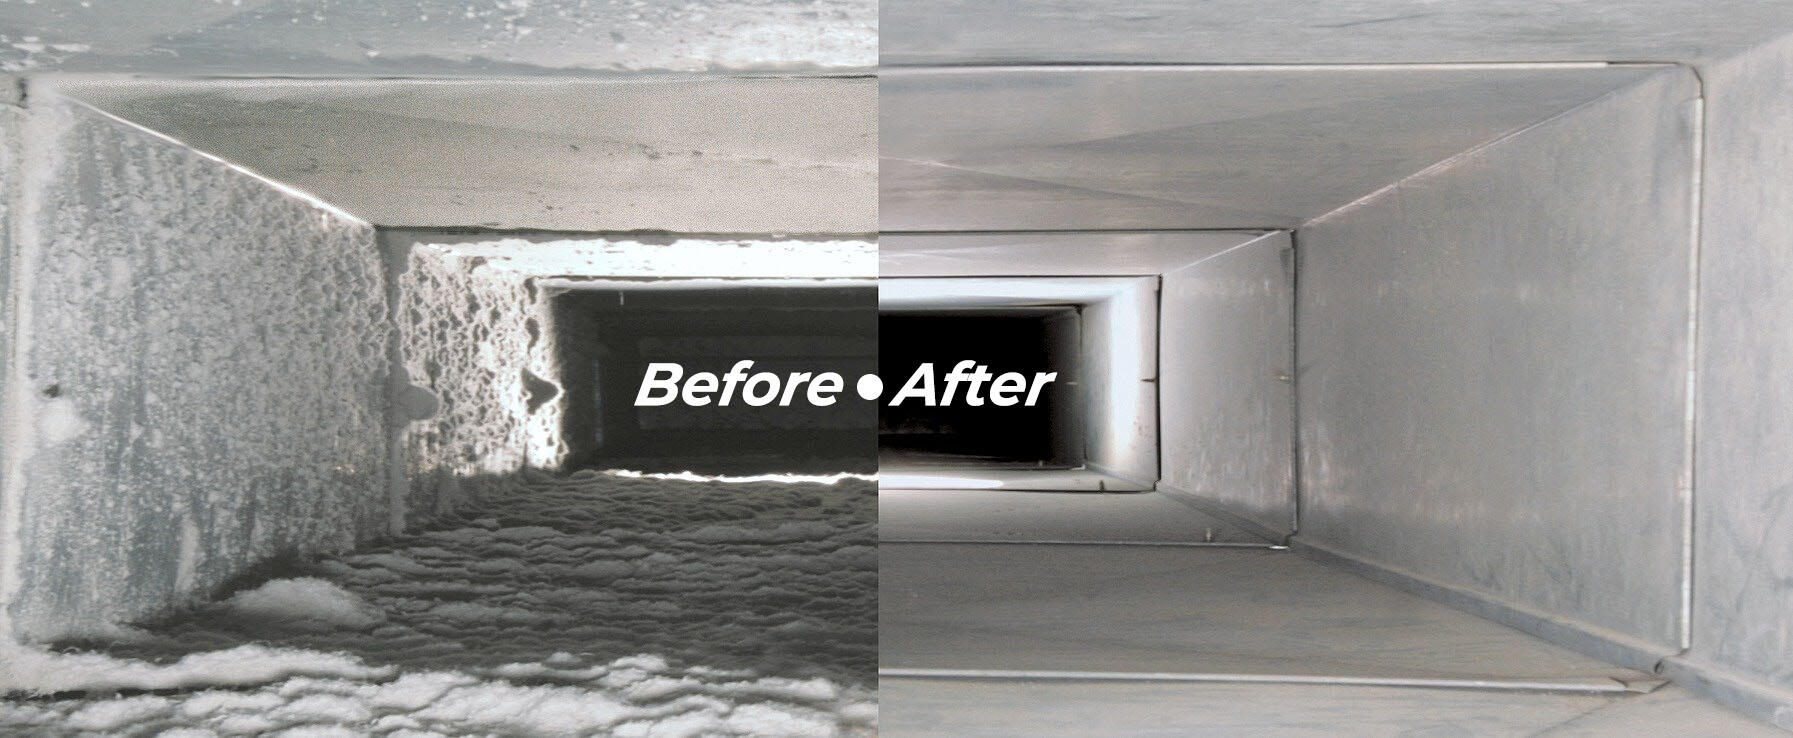 HOW OFTEN SHOULD YOU CLEAN YOUR AIR DUCTS